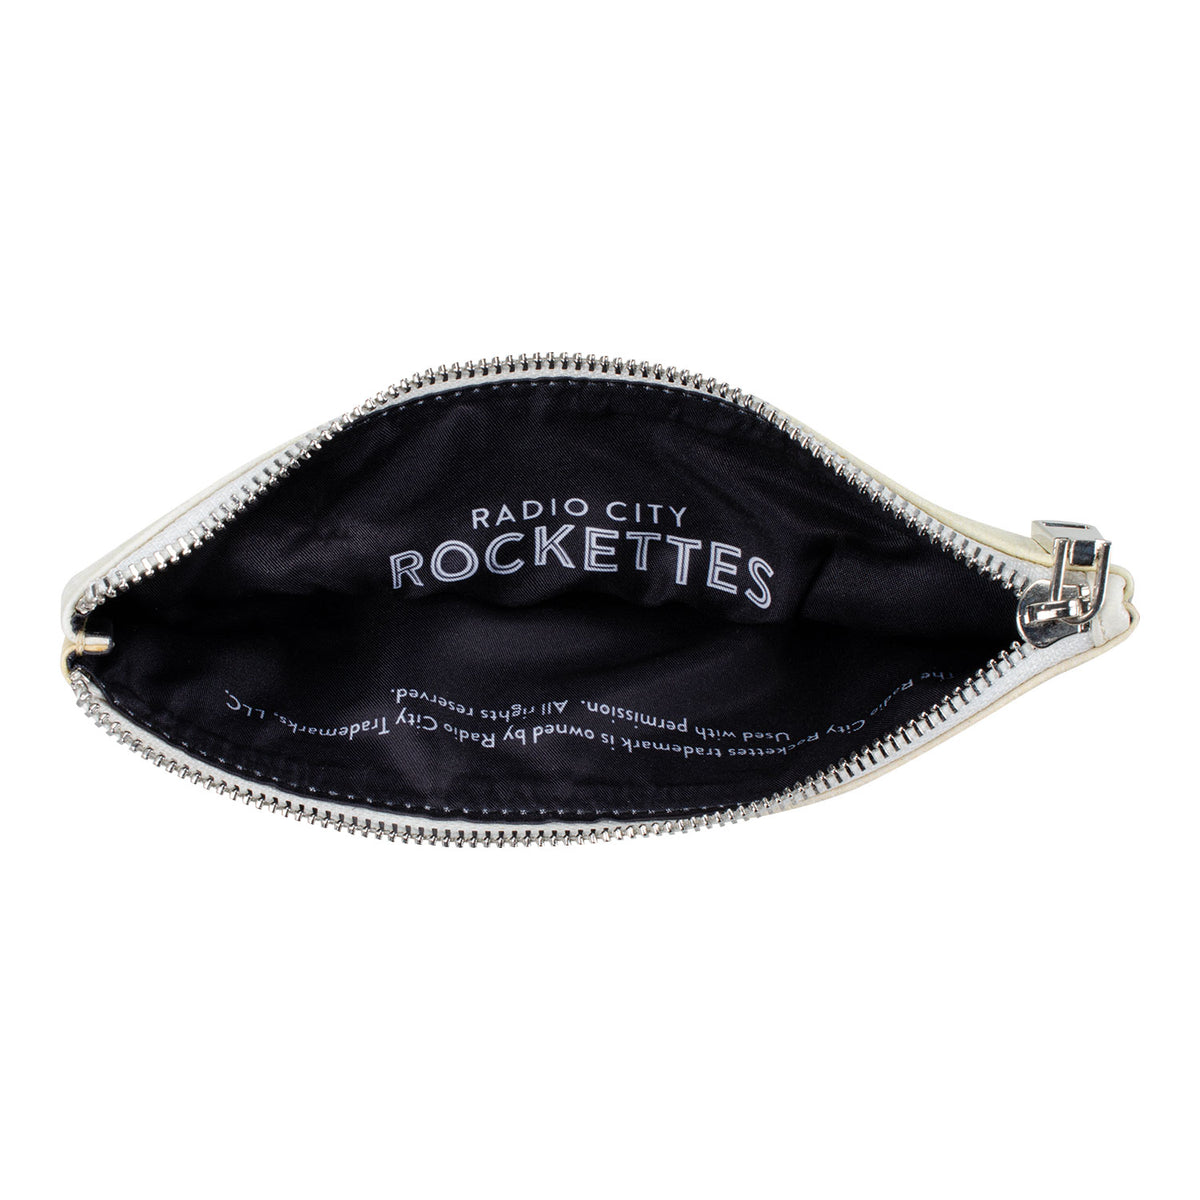 Archival Costume Leather Clutch Bag